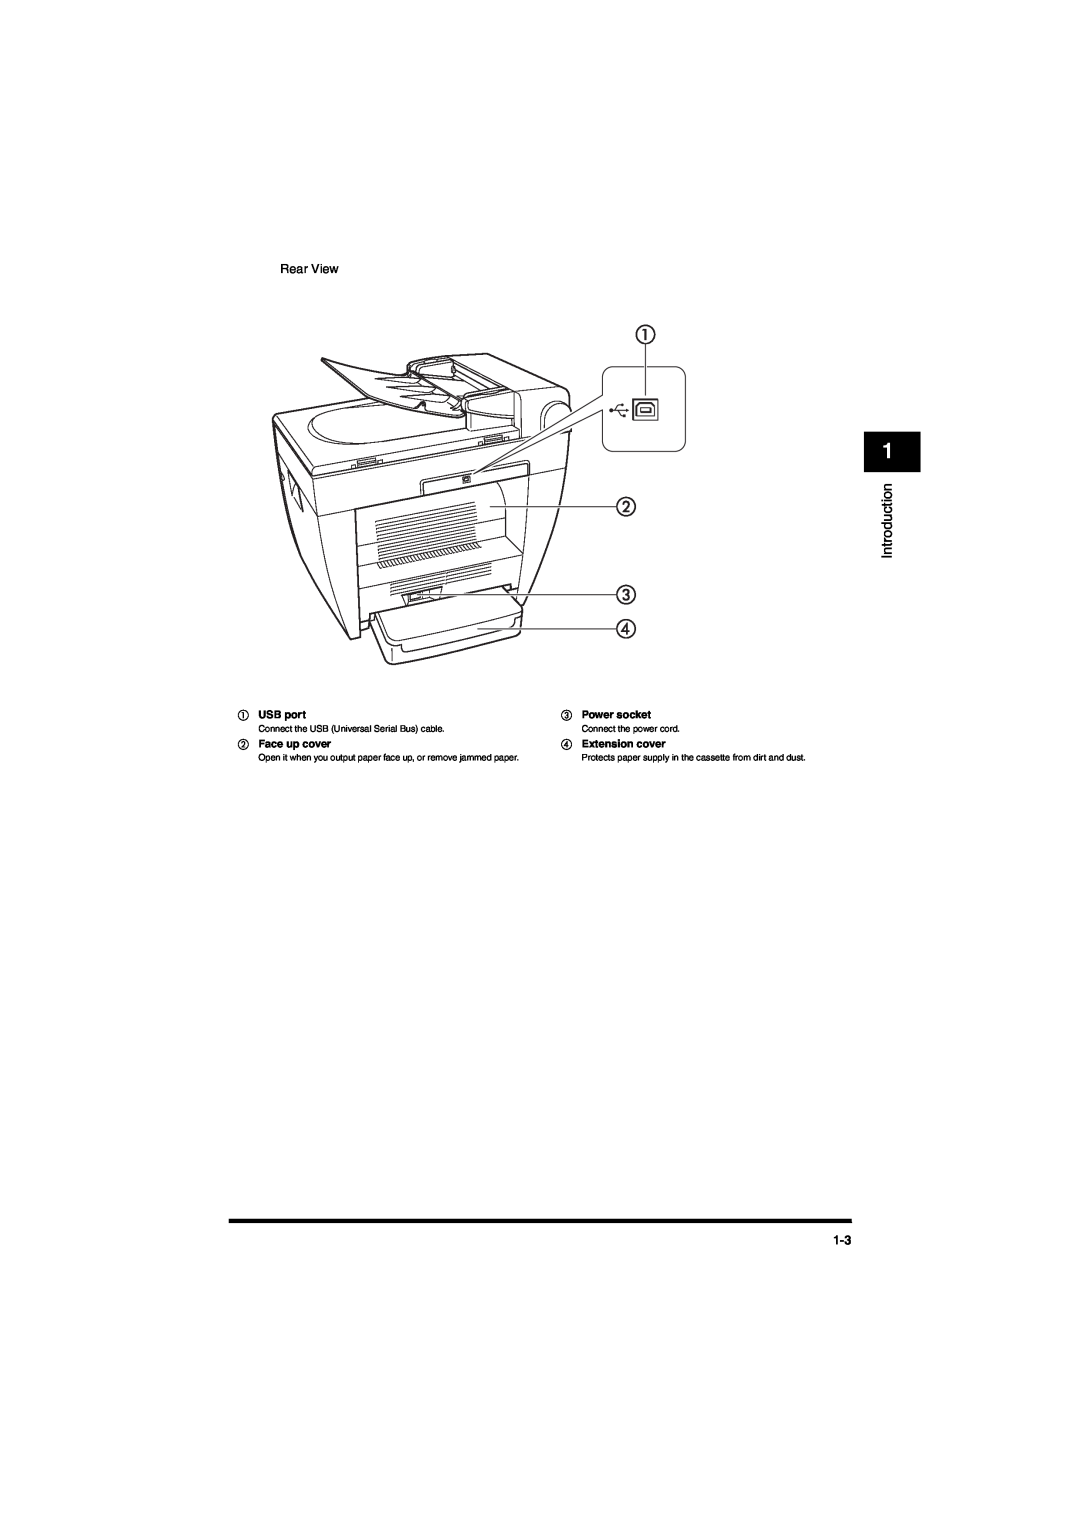 Canon MF5650 manual Introduction, Rear View, a USB port, c Power socket, b Face up cover, d Extension cover 